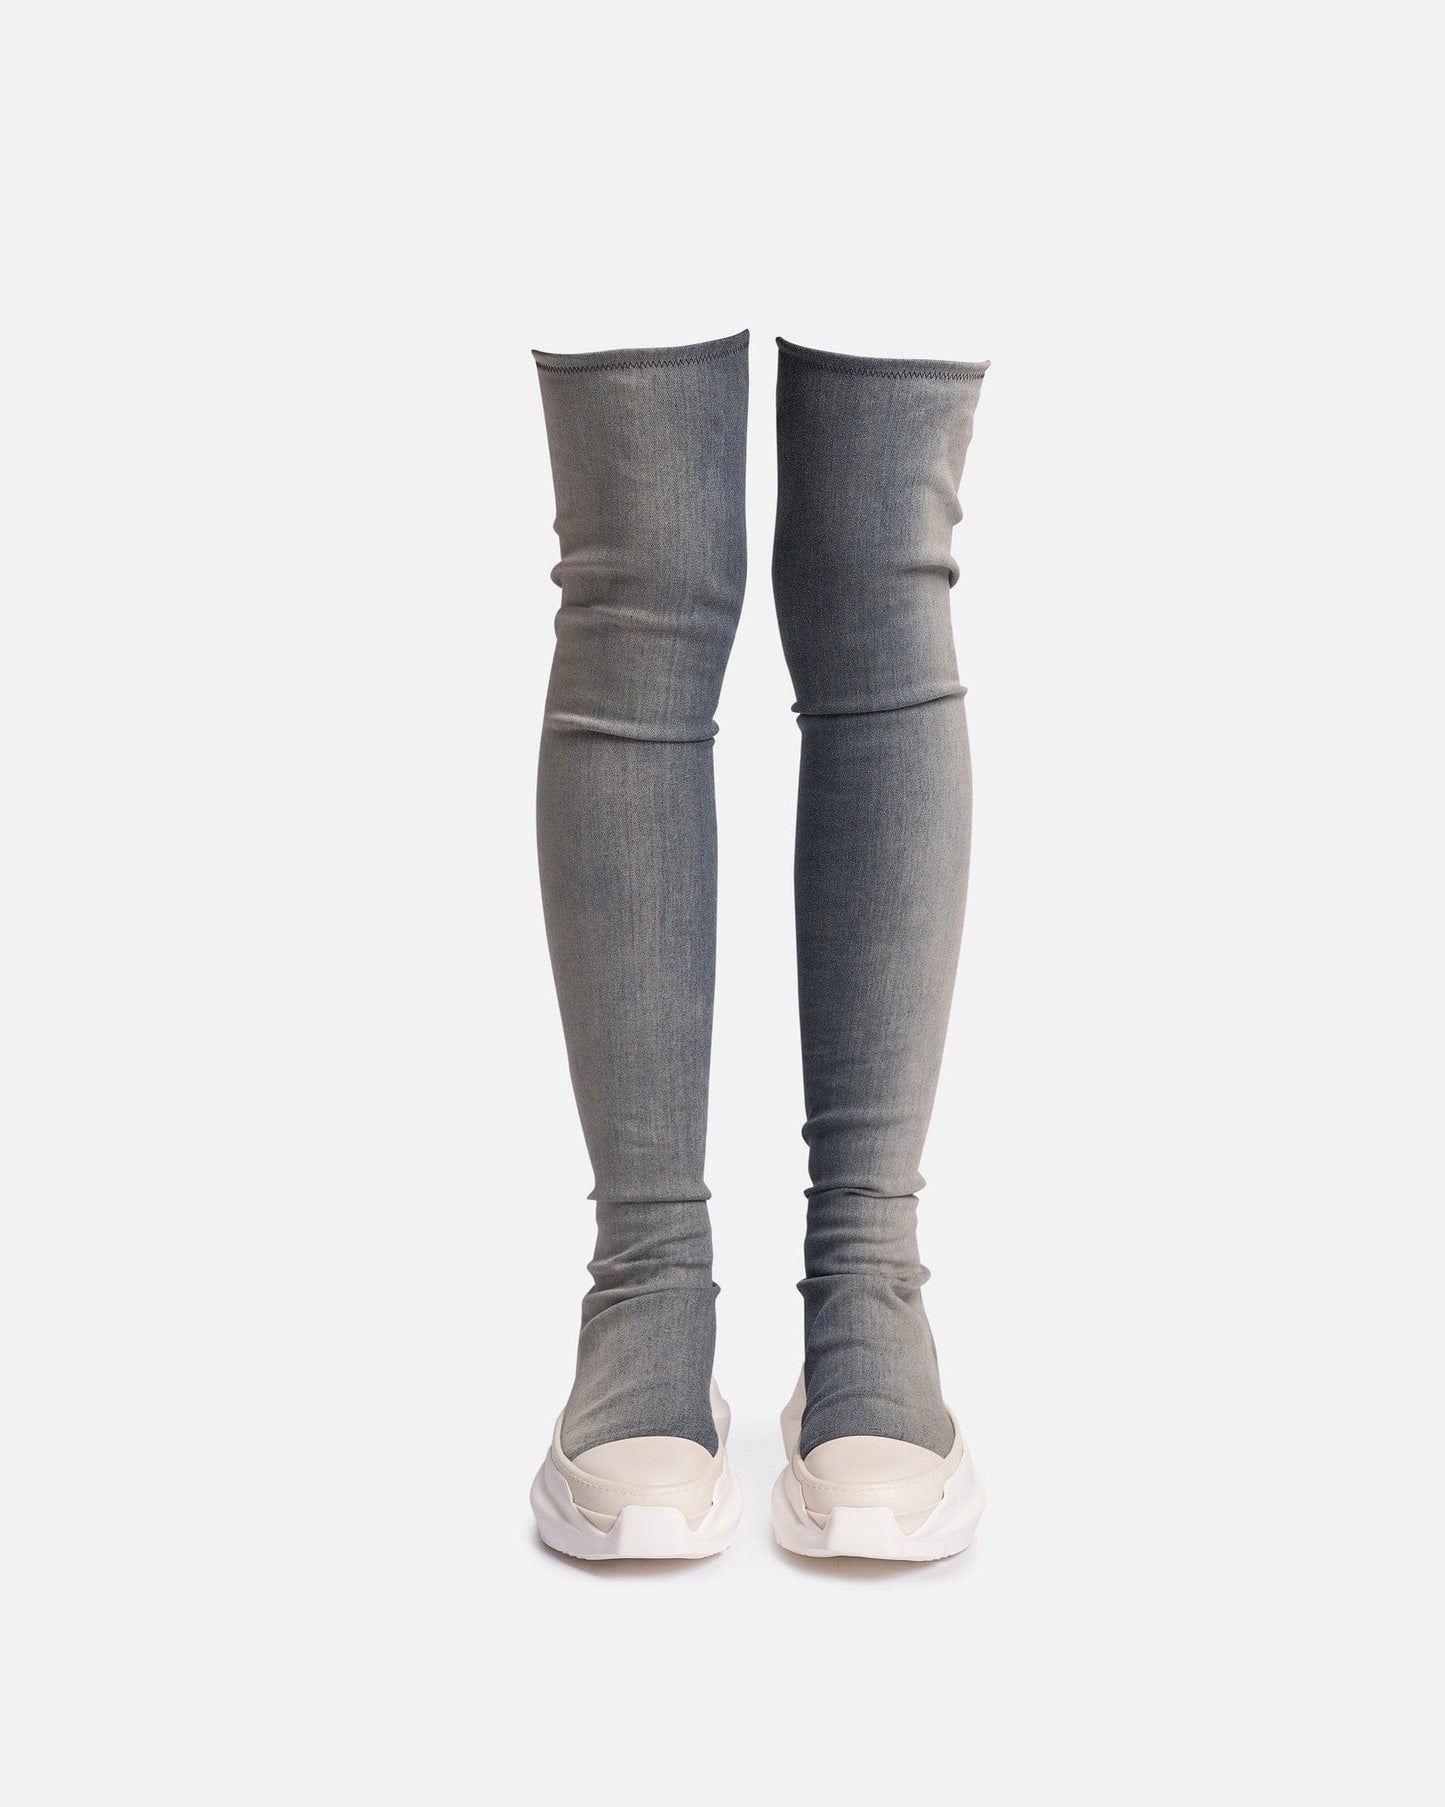 Rick Owens DRKSHDW Women's Shoes Denim Abstract Stockings in Mineral Pearl Degrade/Milk